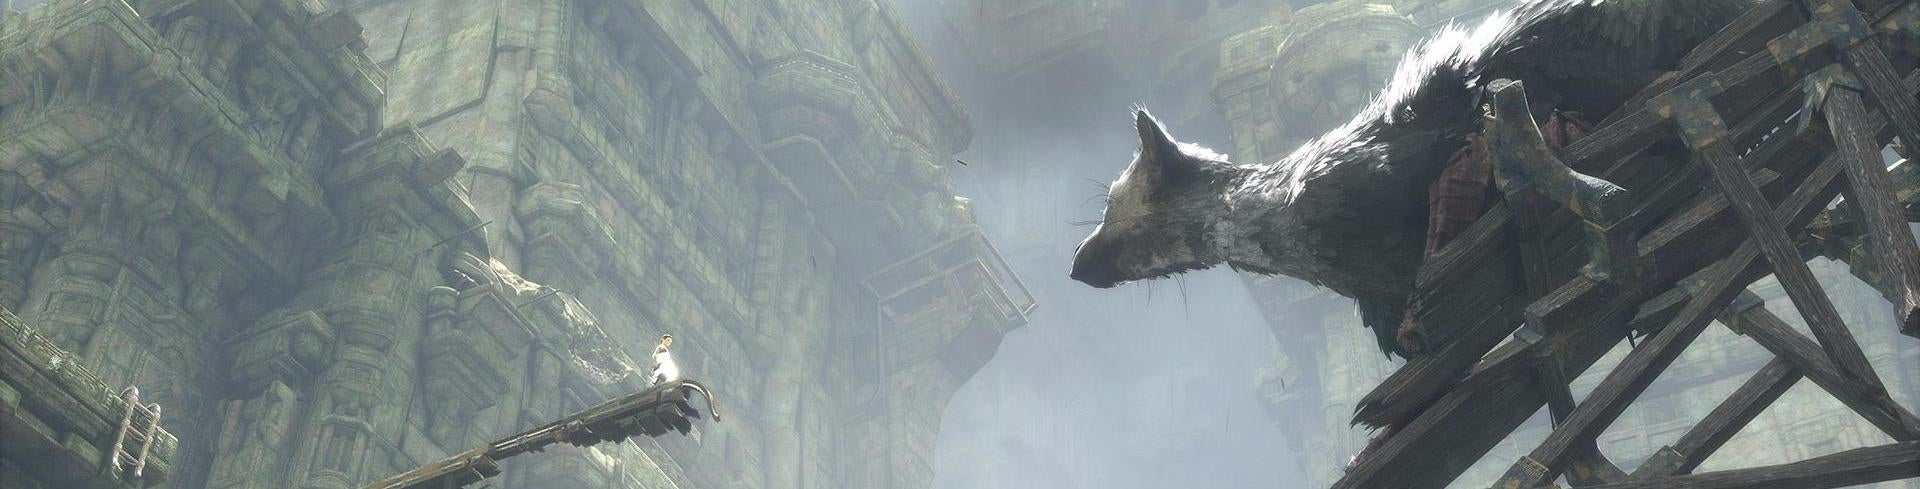 Image for Investigating the origins of The Last Guardian's architecture